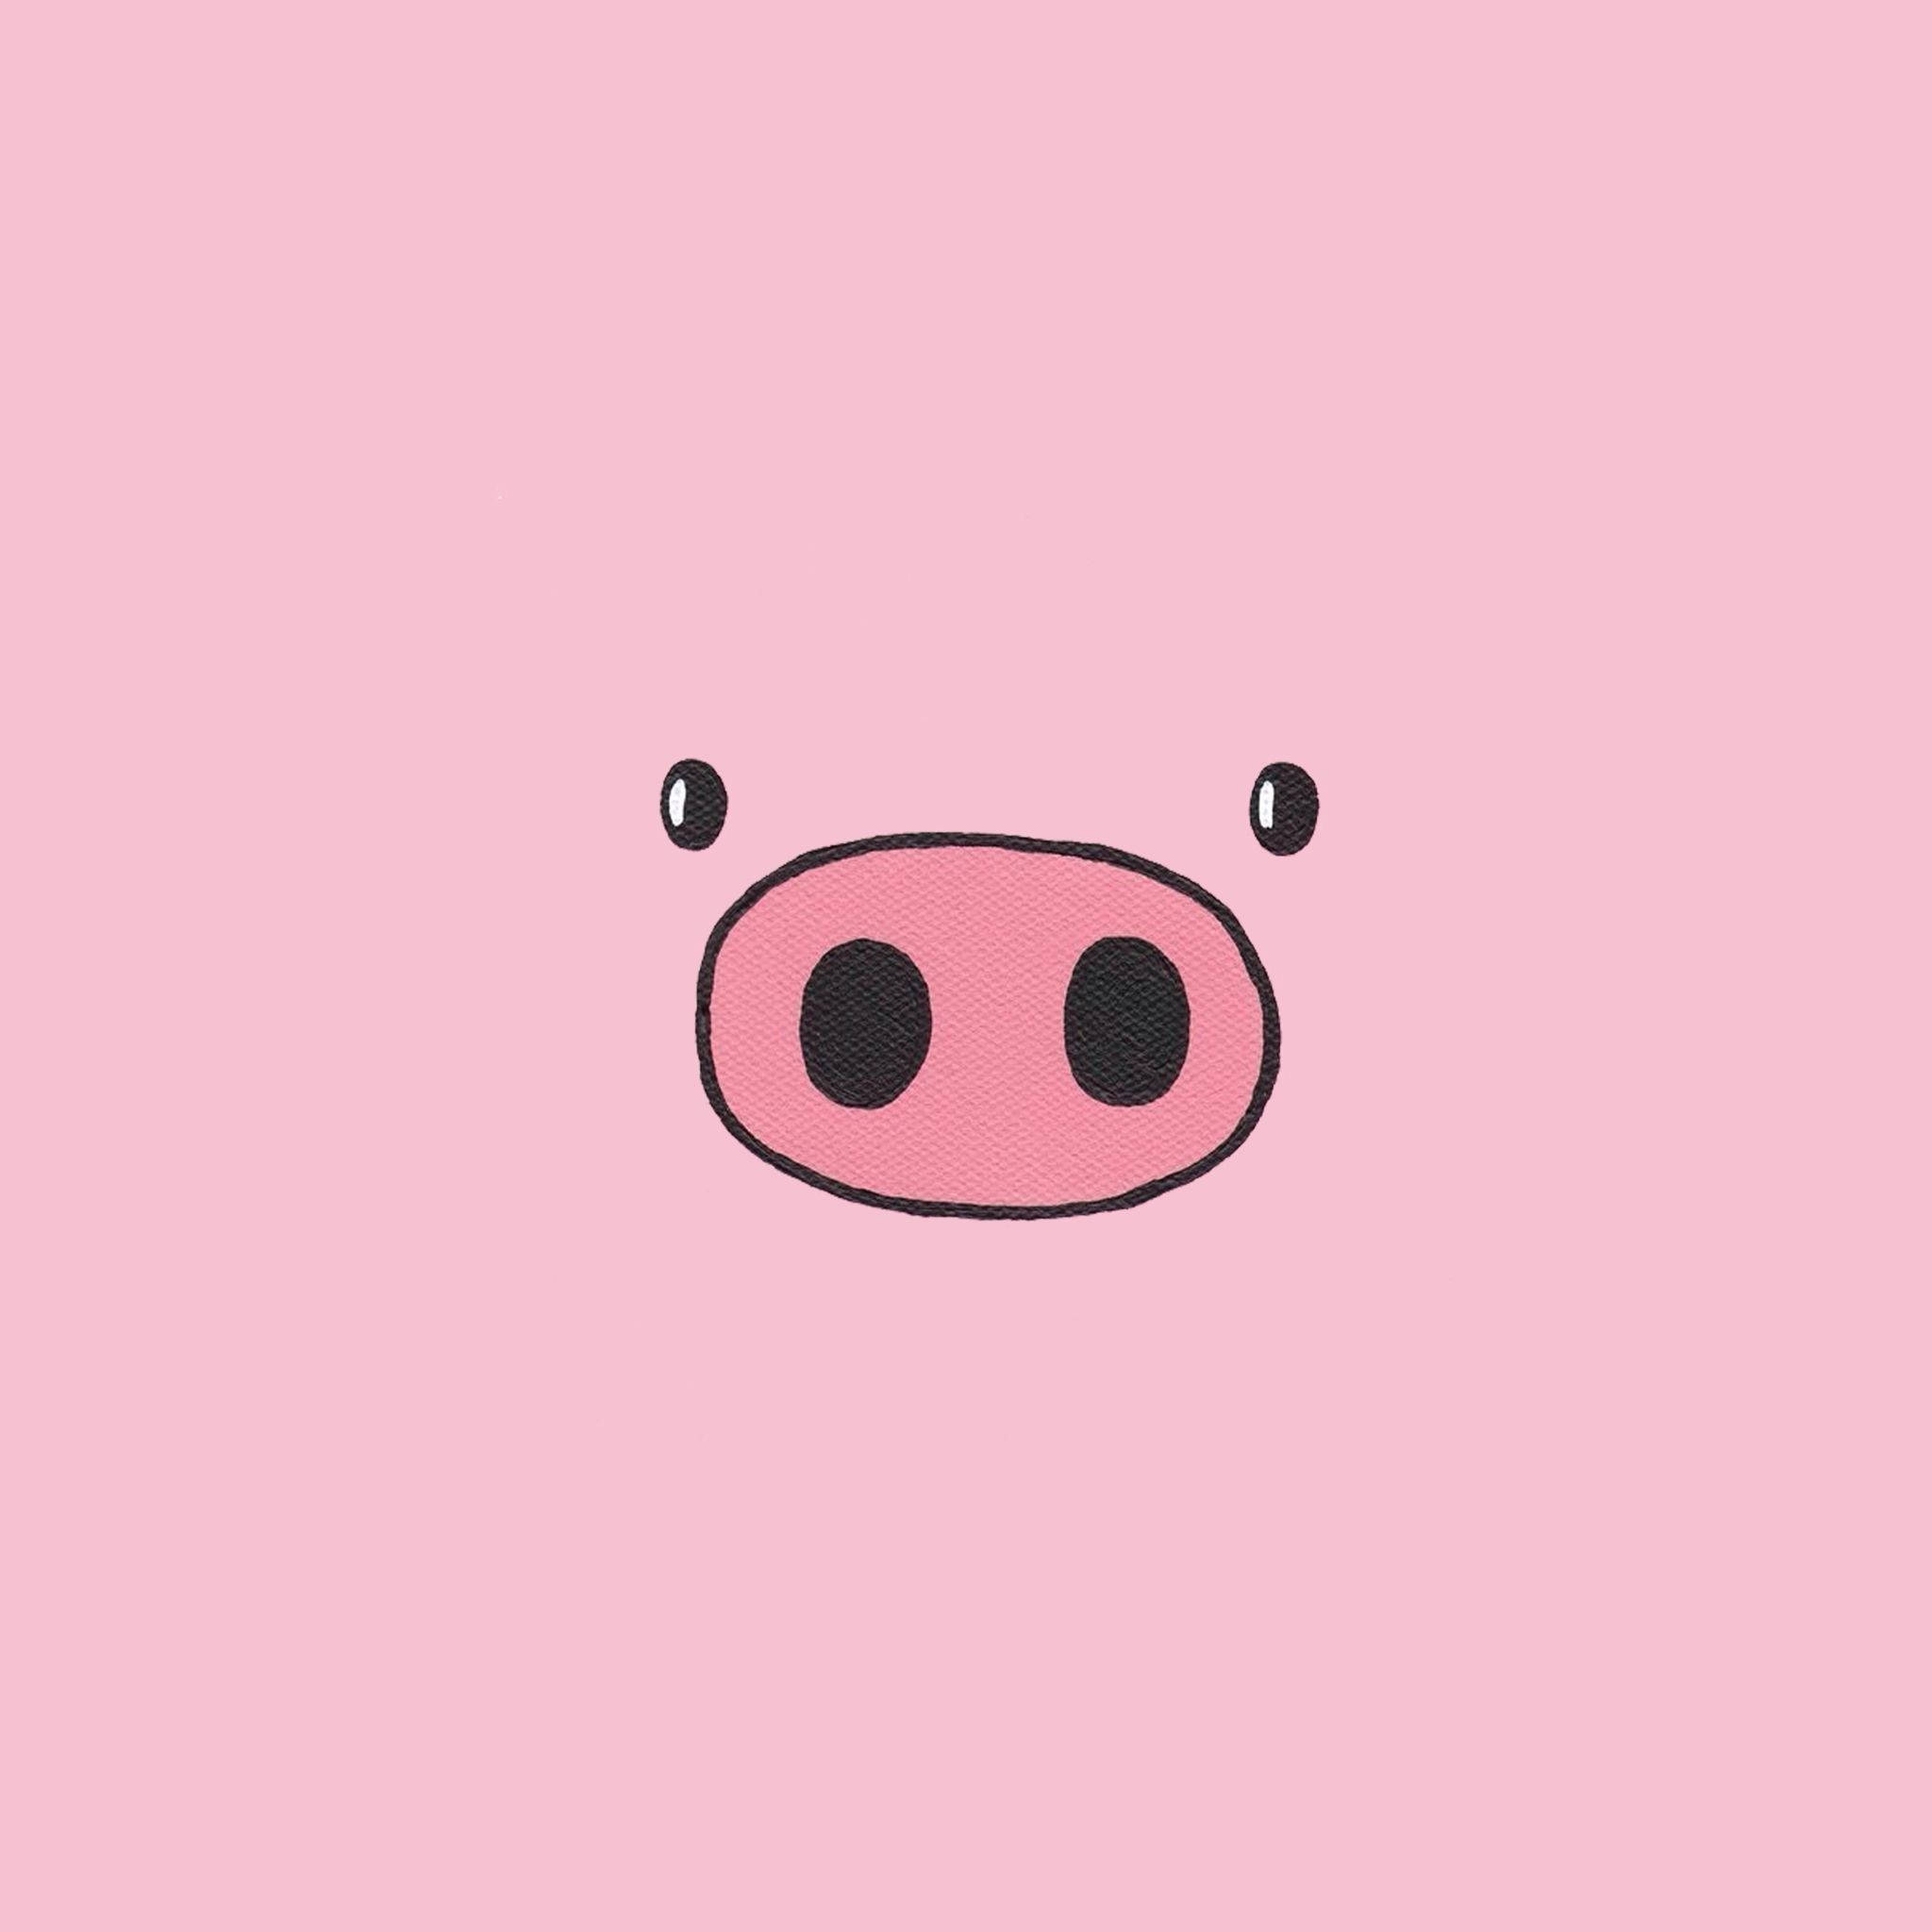 Tải xuống APK Cute Piggy Wallpapers cho Android